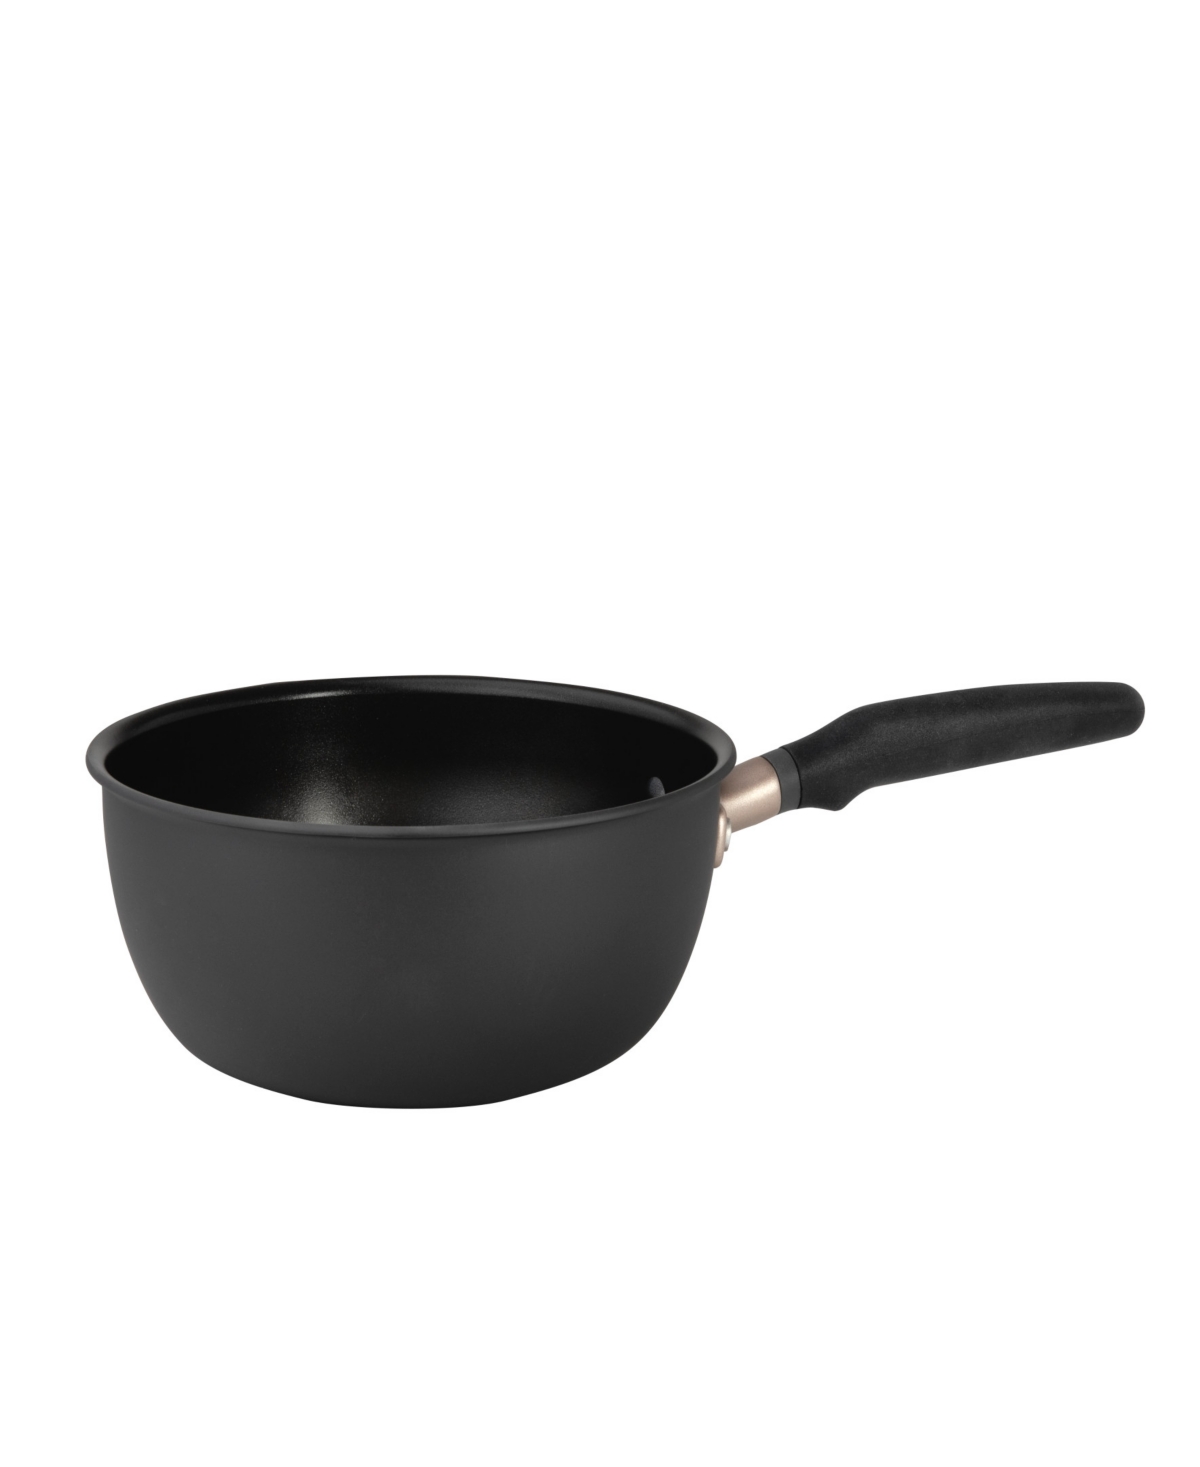 Meyer Accent Series Hard Anodized Alum 4.5-quart Non-stick Chef Pan In Matte Black With Gold Accent